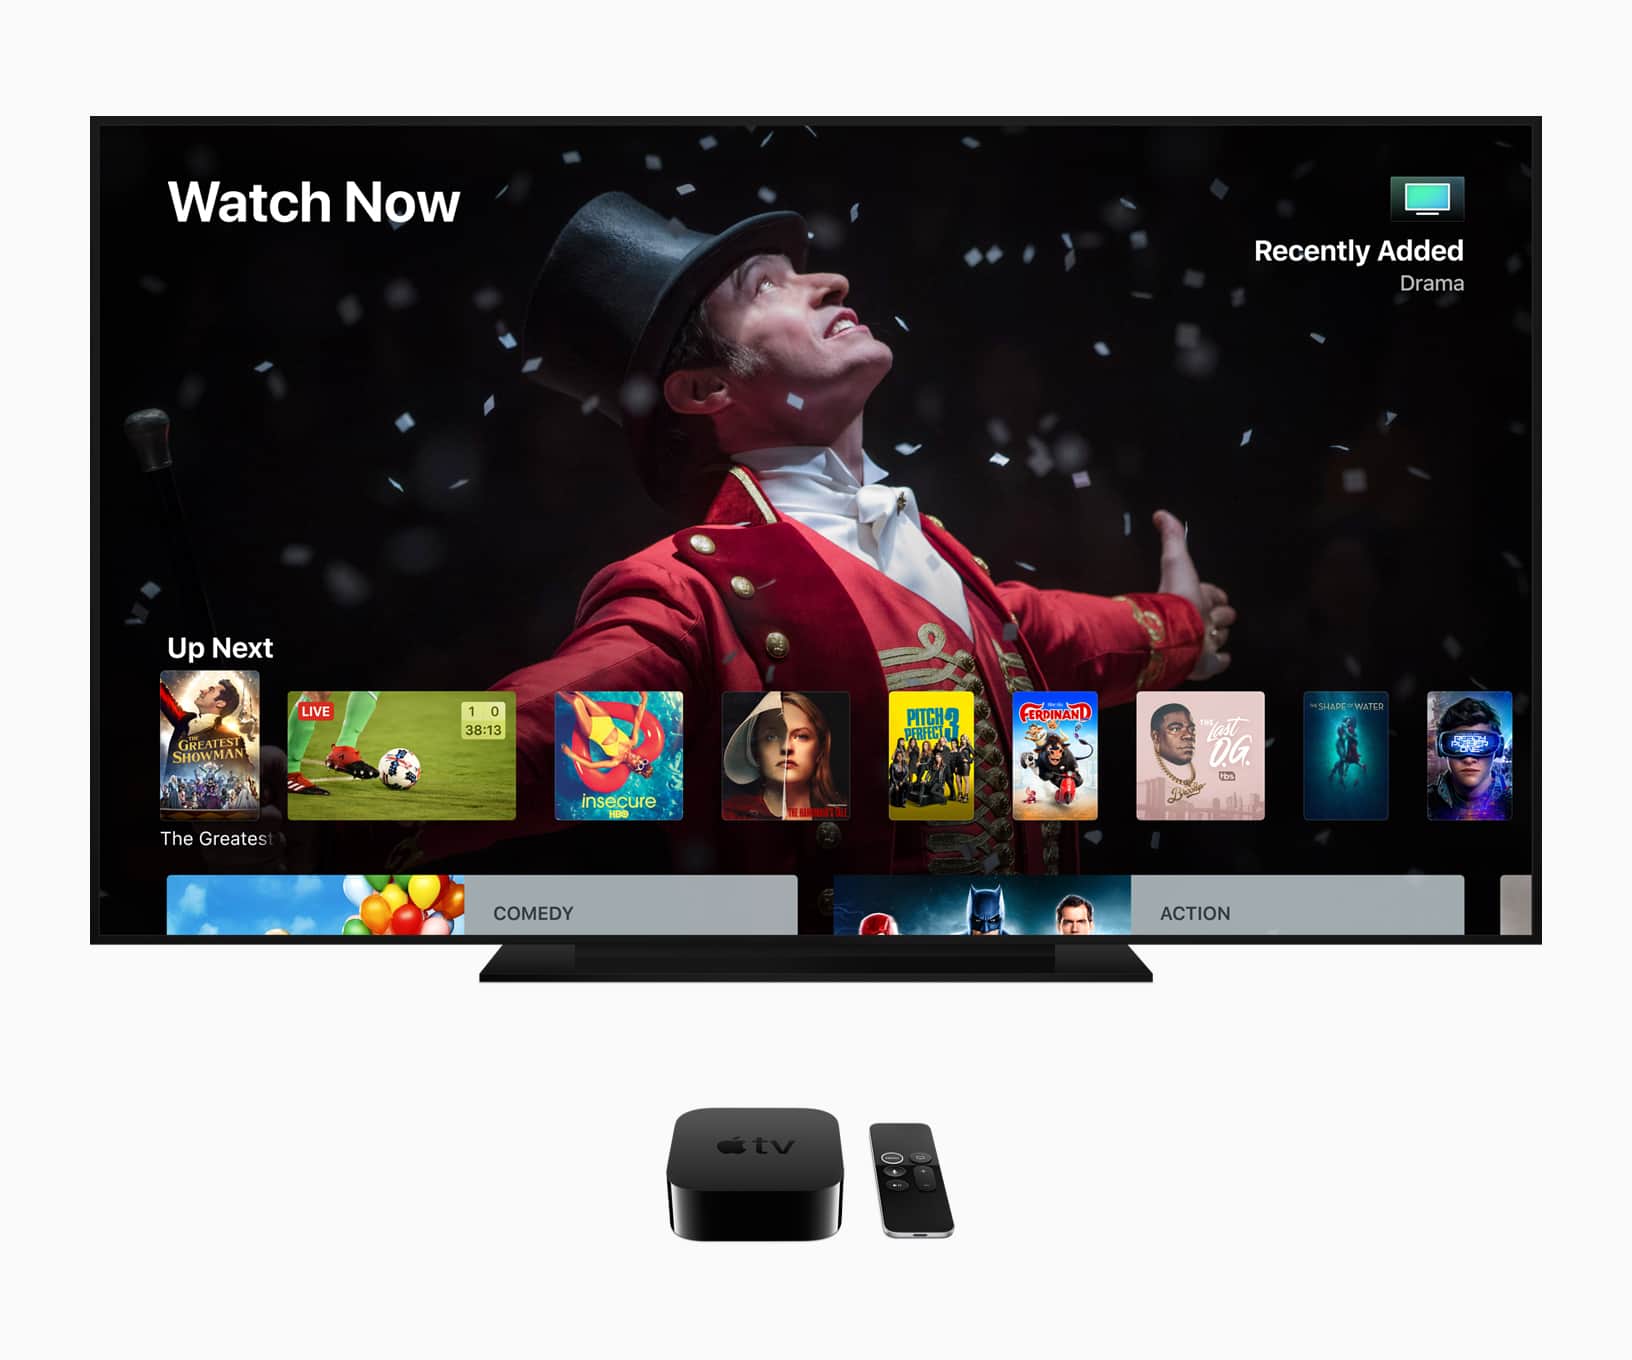 tvOS 12 &  watchOS 5 introduced by Apple at WWDC